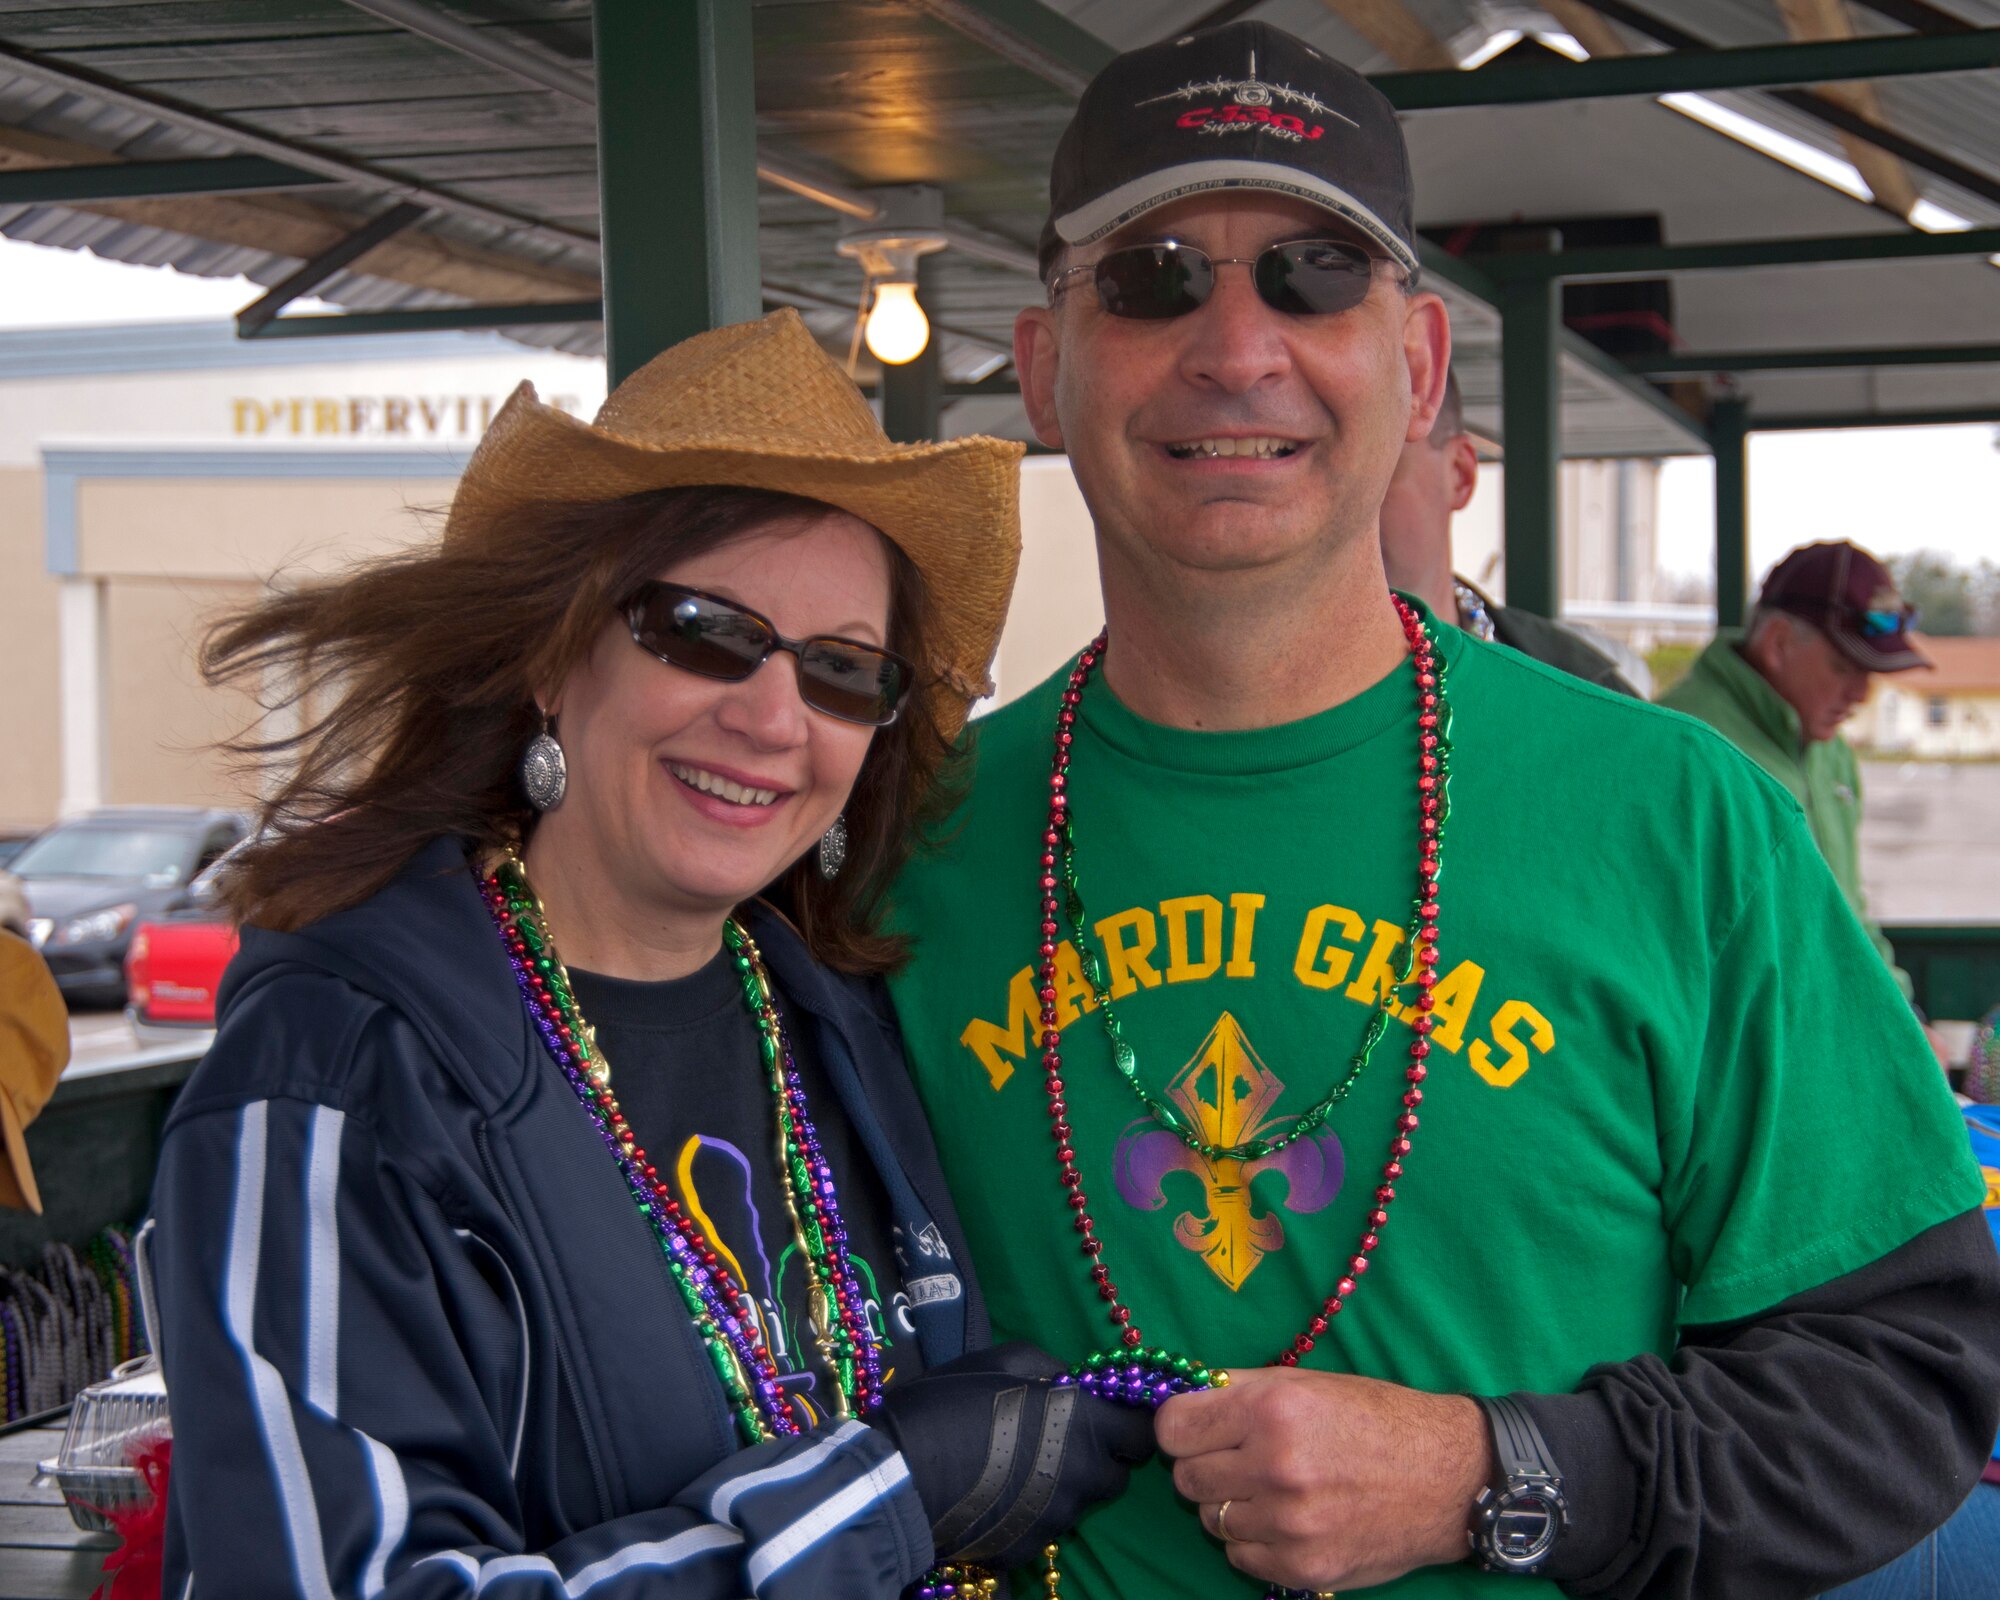 Brig. Gen. James Muscatell, 403rd Wing commander and his wife, Nancy, pose for a photo on the City of D'Iberville's float before the annual Mardi Gras parade kicked off March 6 in D'Iberville, Miss.  General and Mrs. Muscatell were asked by the city to represent the 403rd Wing, Keesler Air Force Base, Miss.  (U.S. Air Force photo by Tech. Sgt. Tanya King)